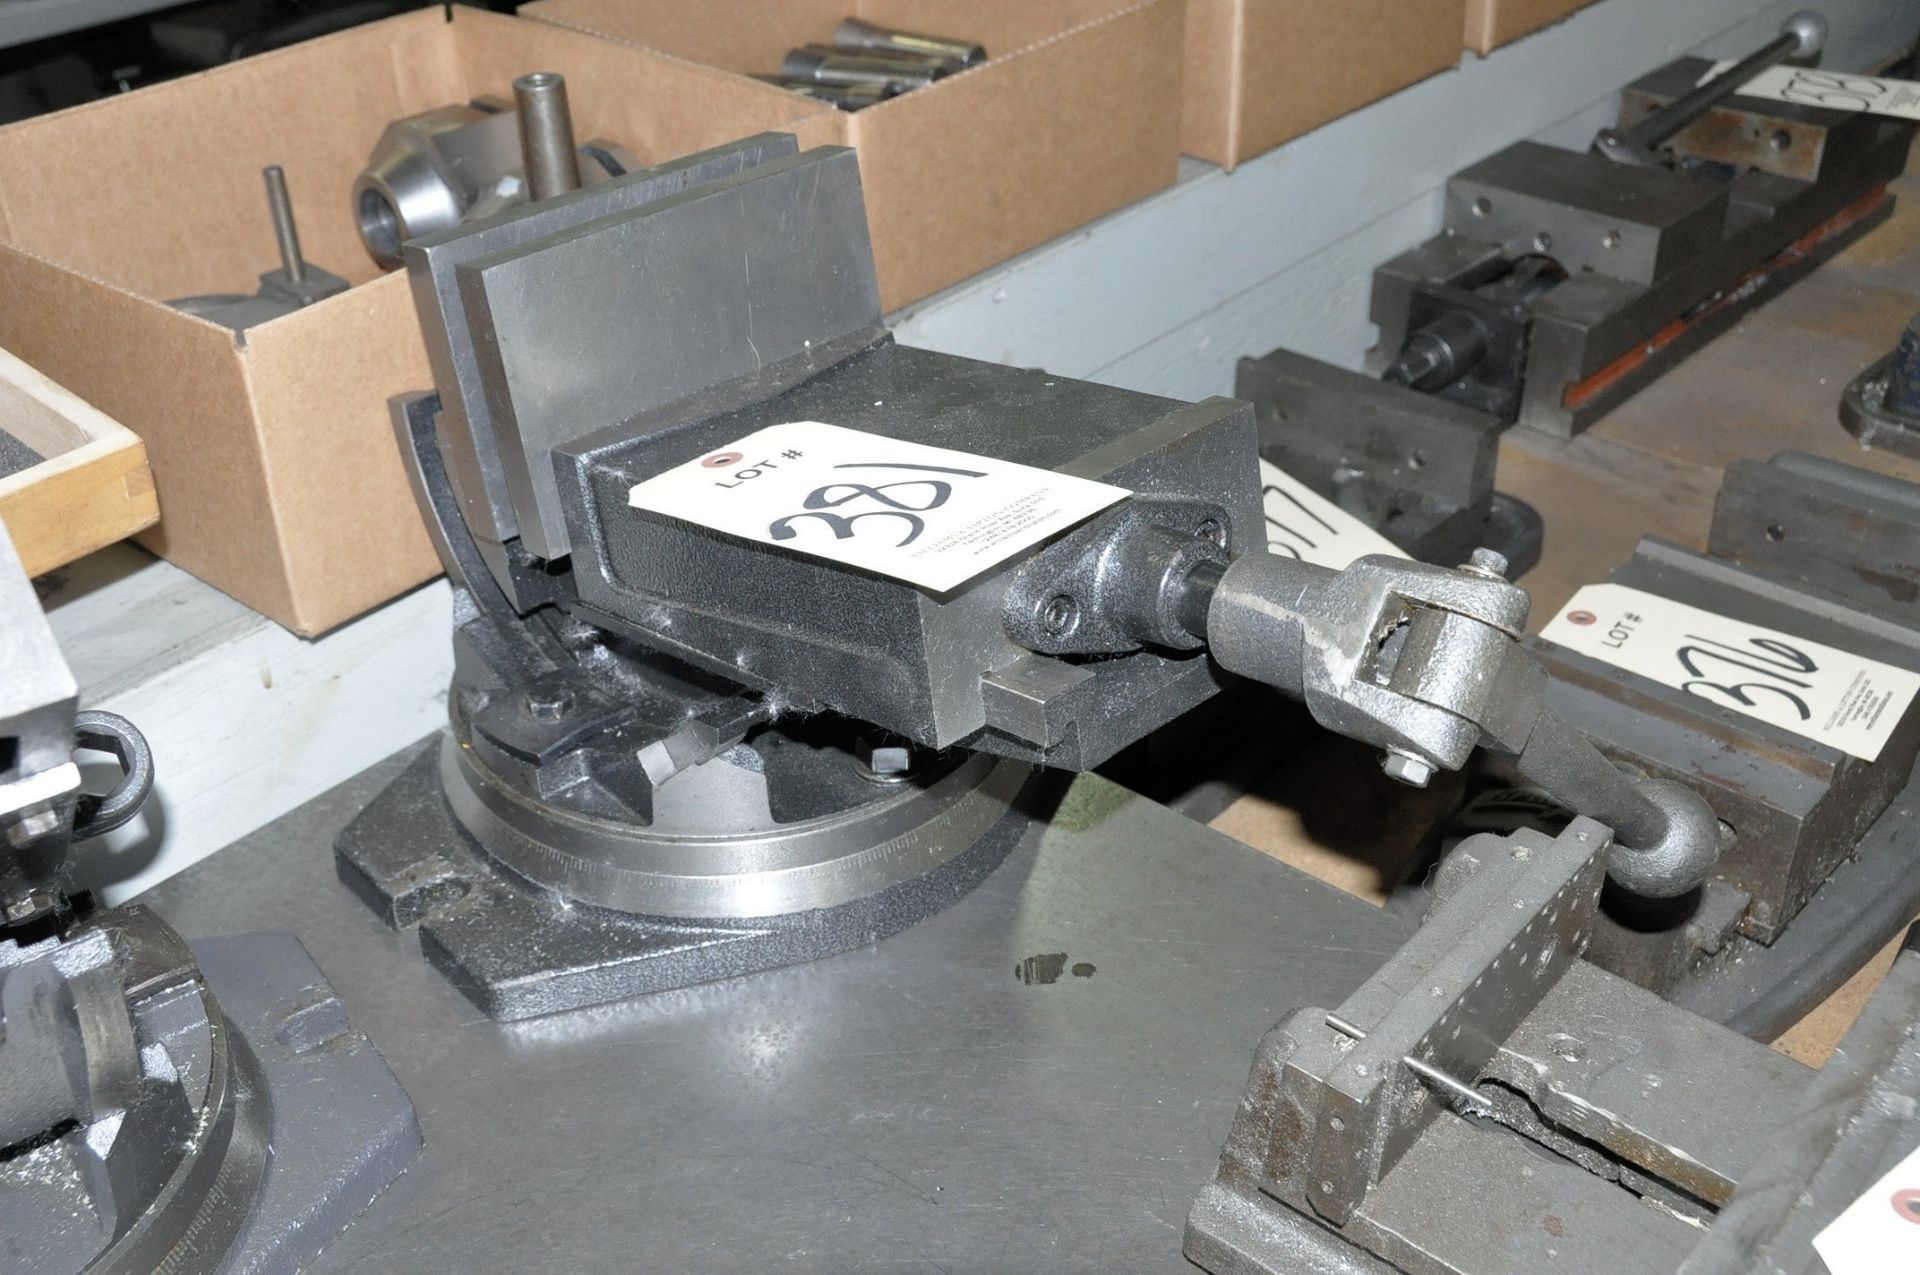 6" Inclinable Rotary Machine Vise with 6 1/2" Jaws